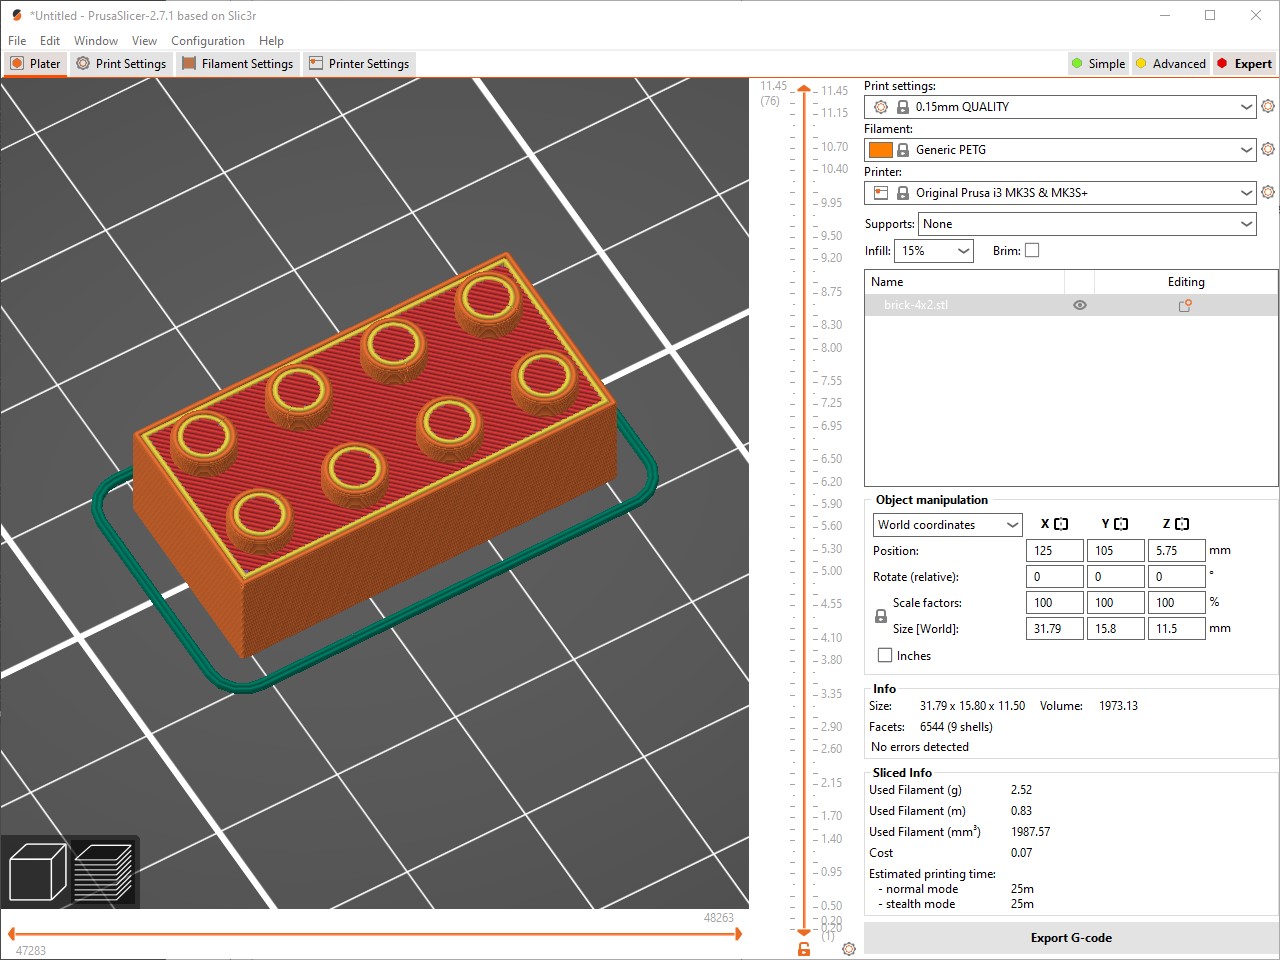 The STL model for the 3D printed LEGO brick is imported into the slicer software